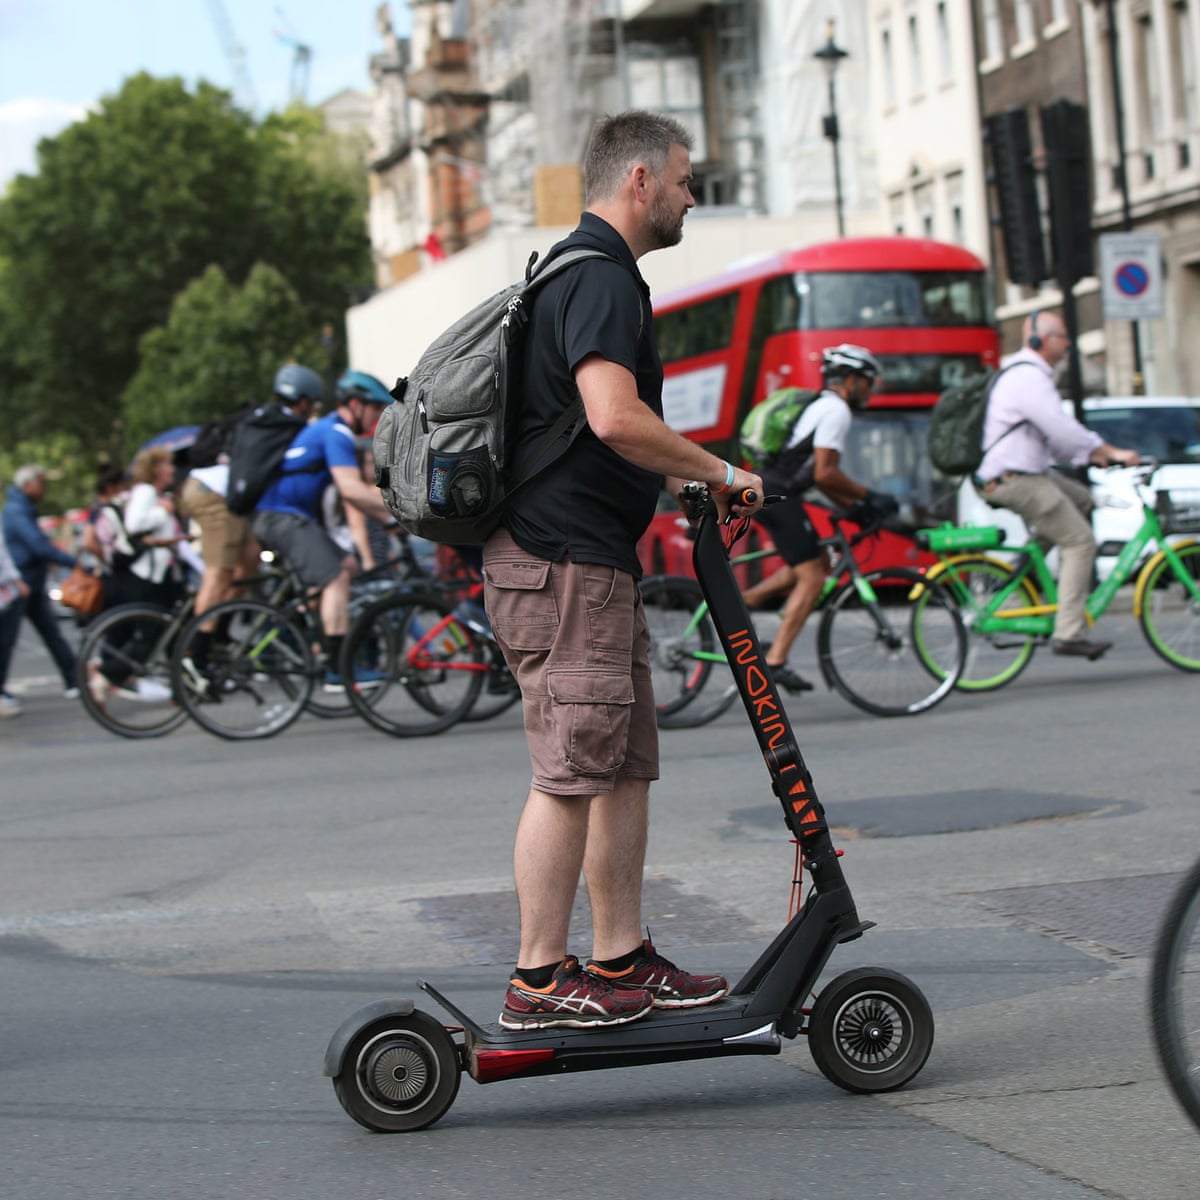 Rented e-scooters will be legal from Saturday, says UK government | | The Guardian